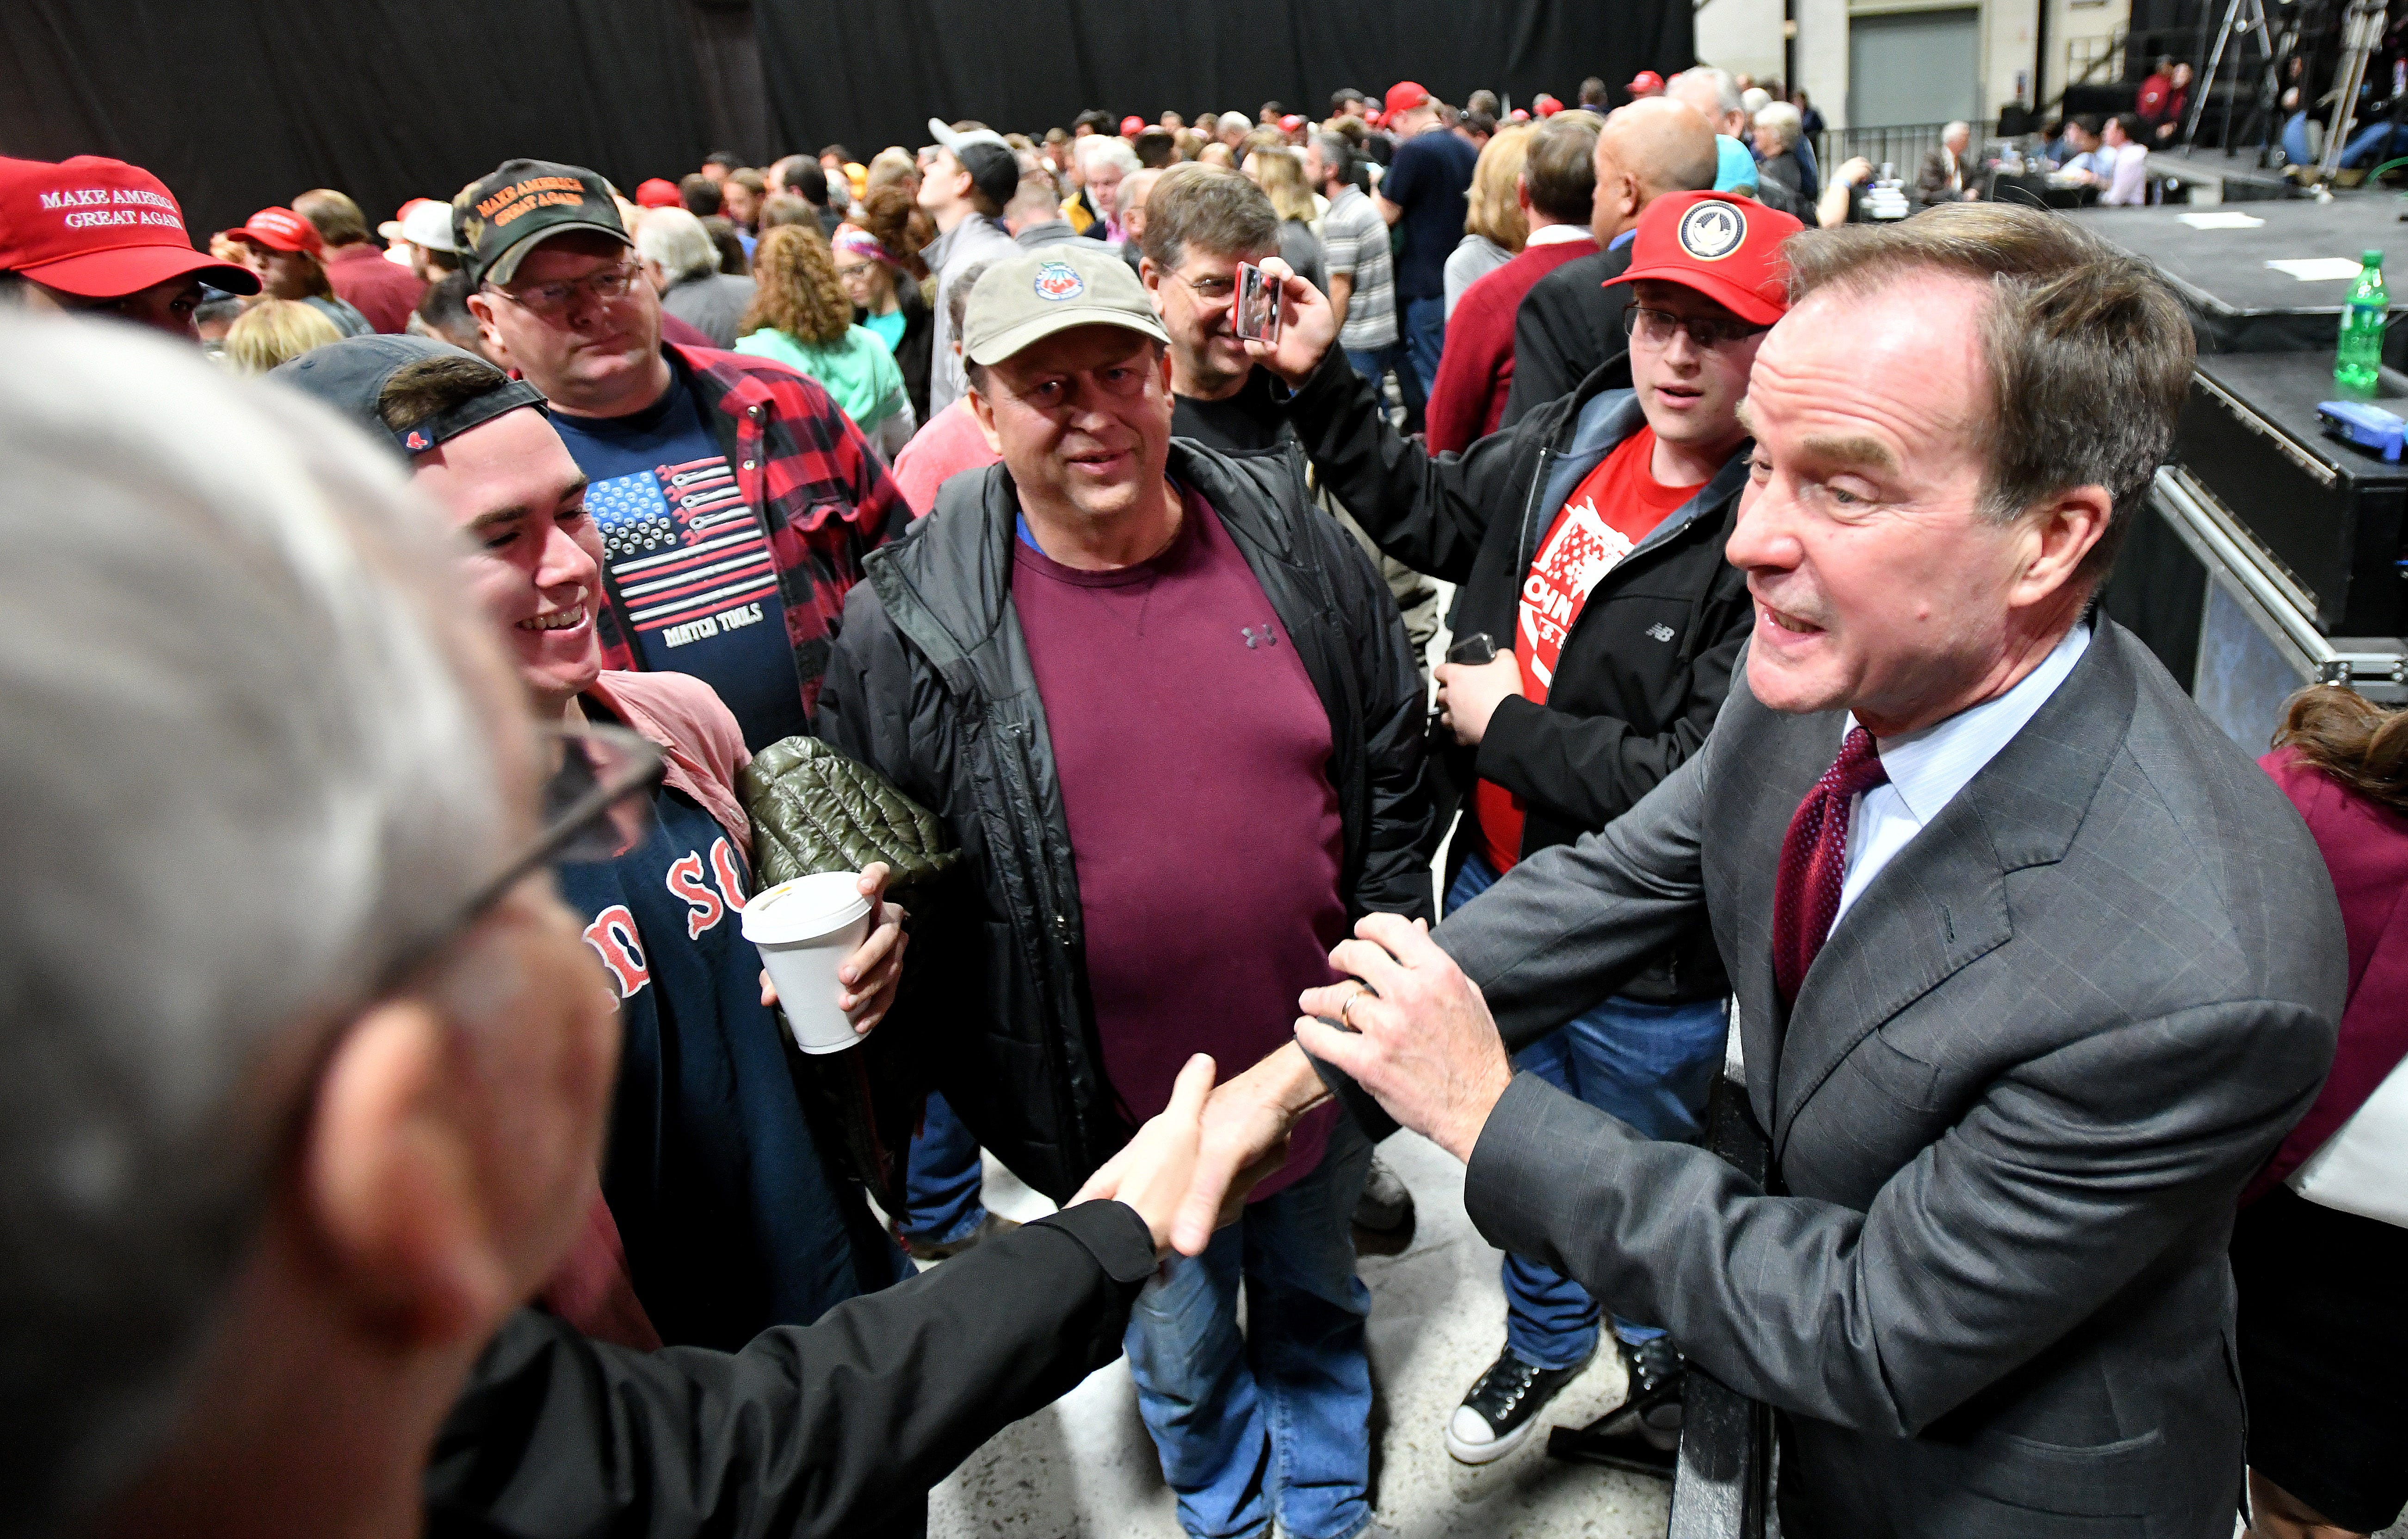 Bill Schuette greet supporters before Vice President Mike Pence campaigns with Republican candidates.